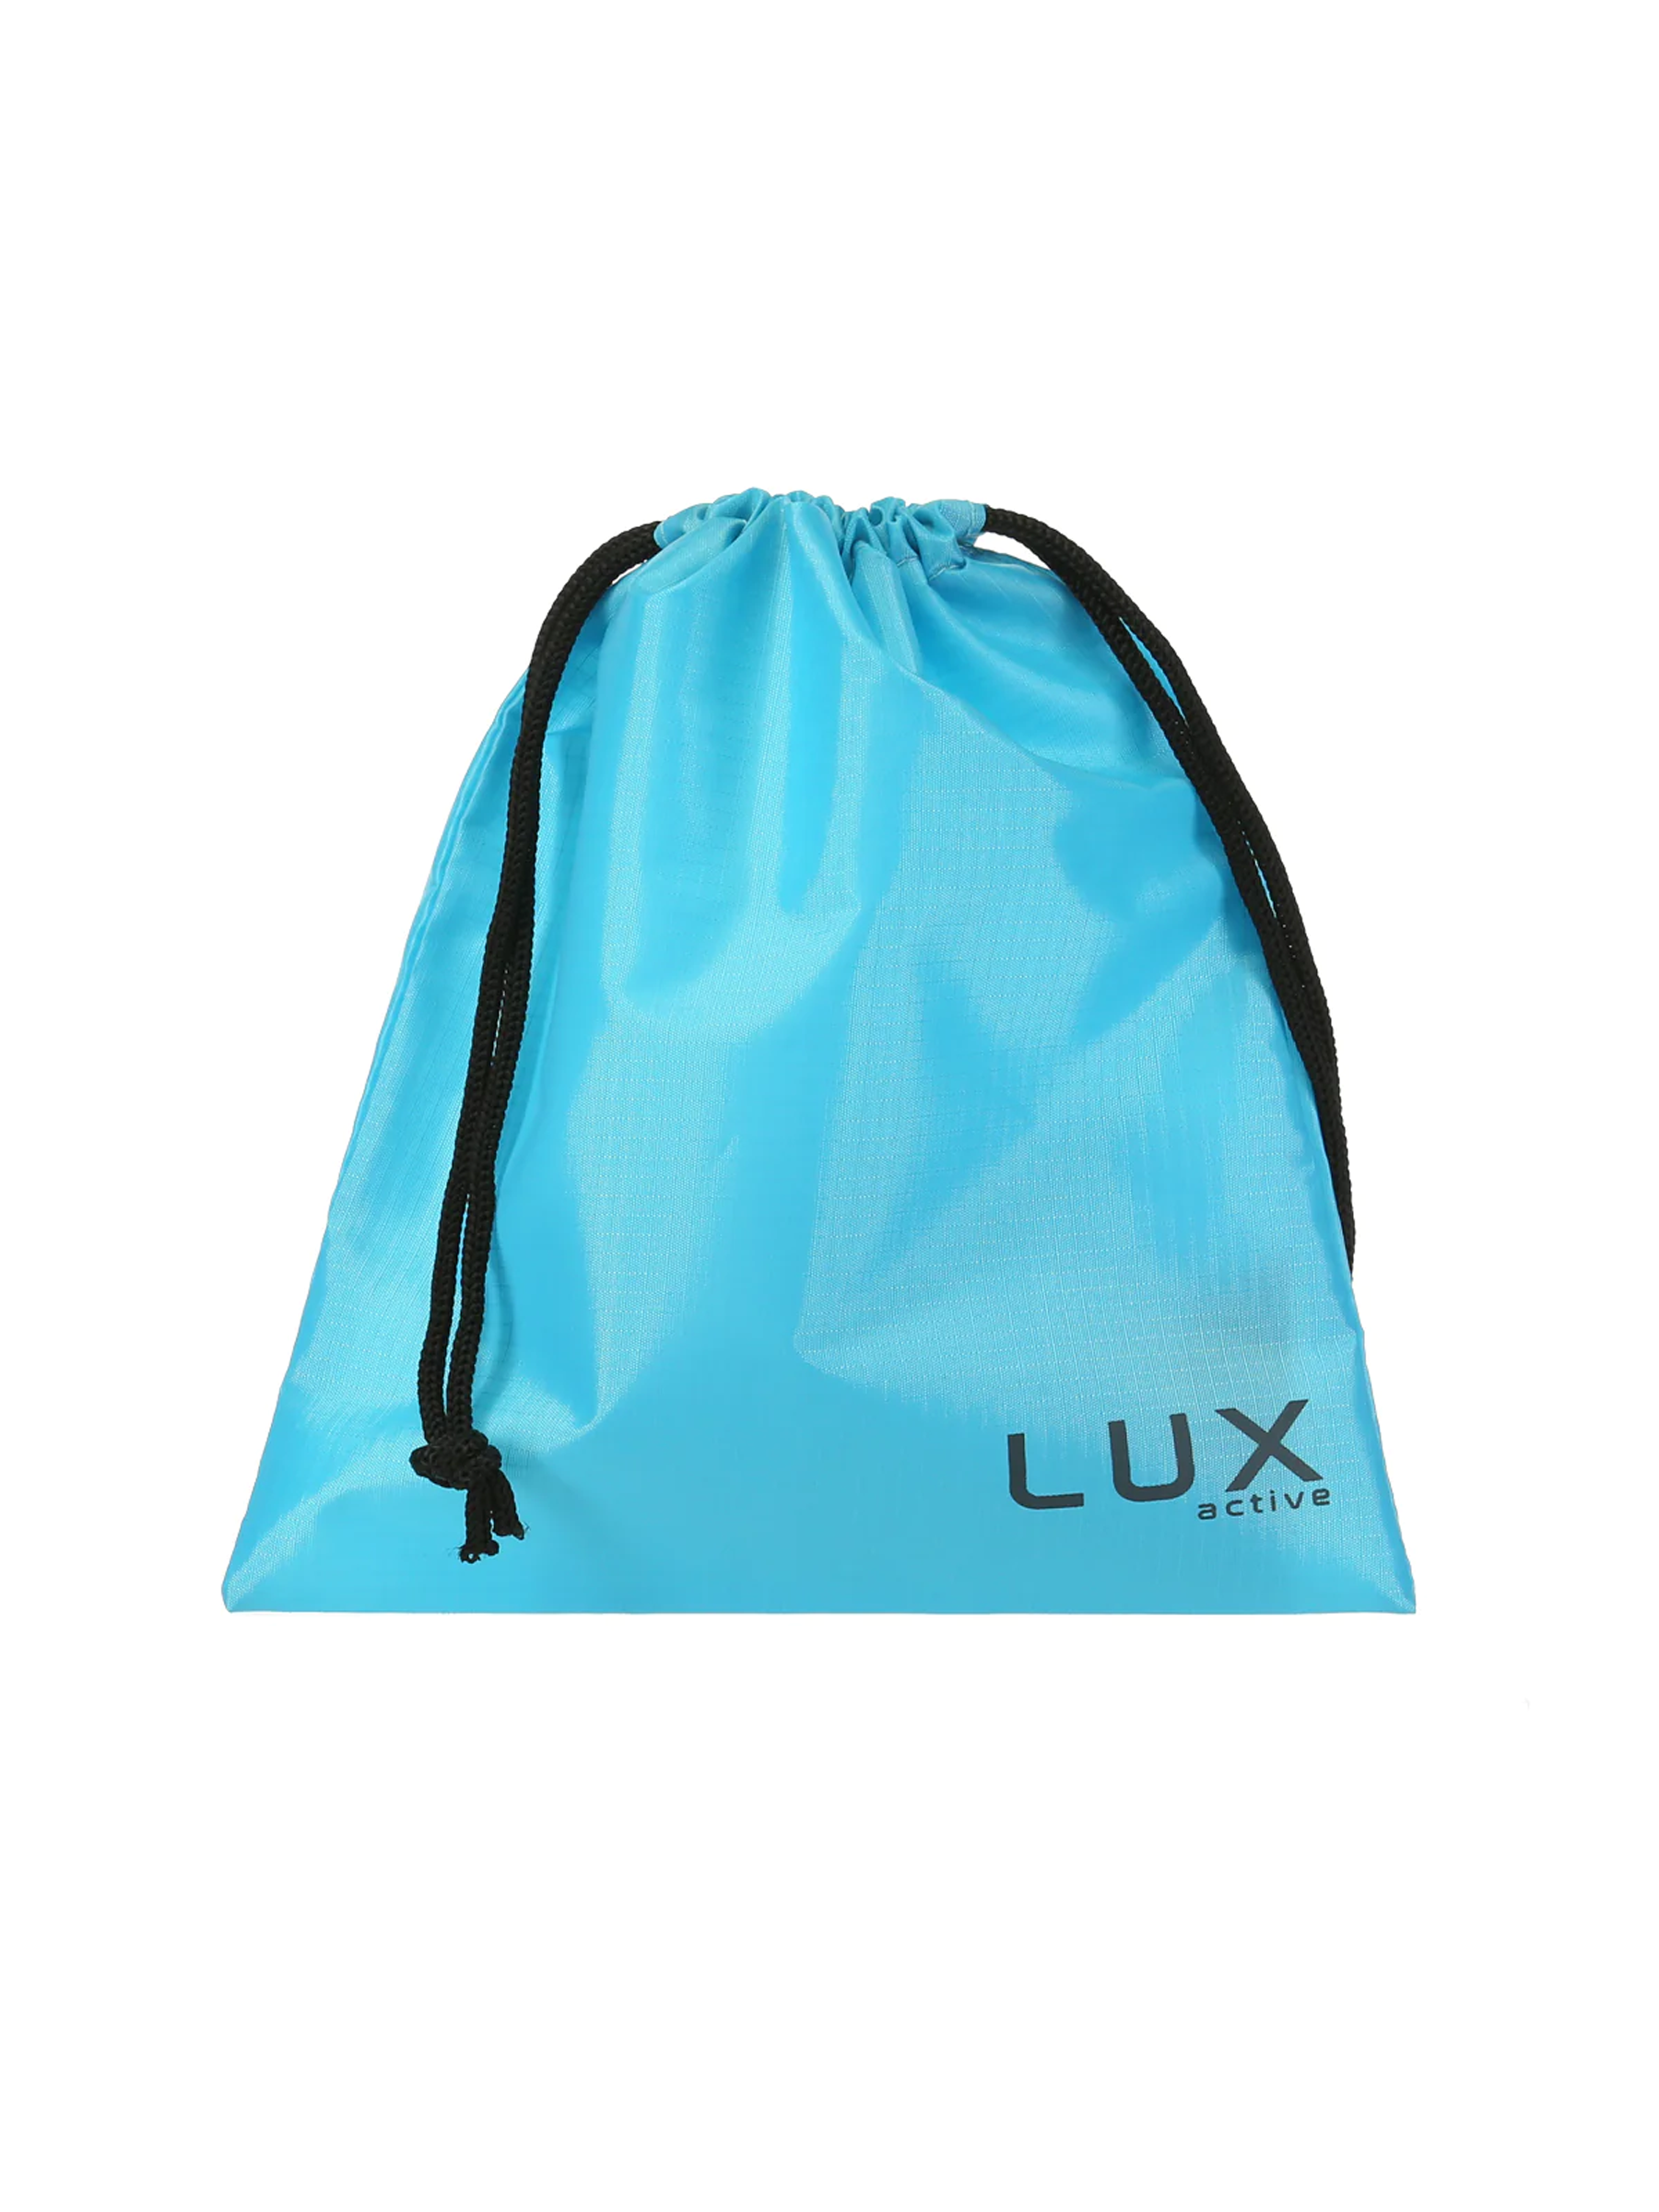 Luxe Active Equip Anal Trainer Kit Storage Bag